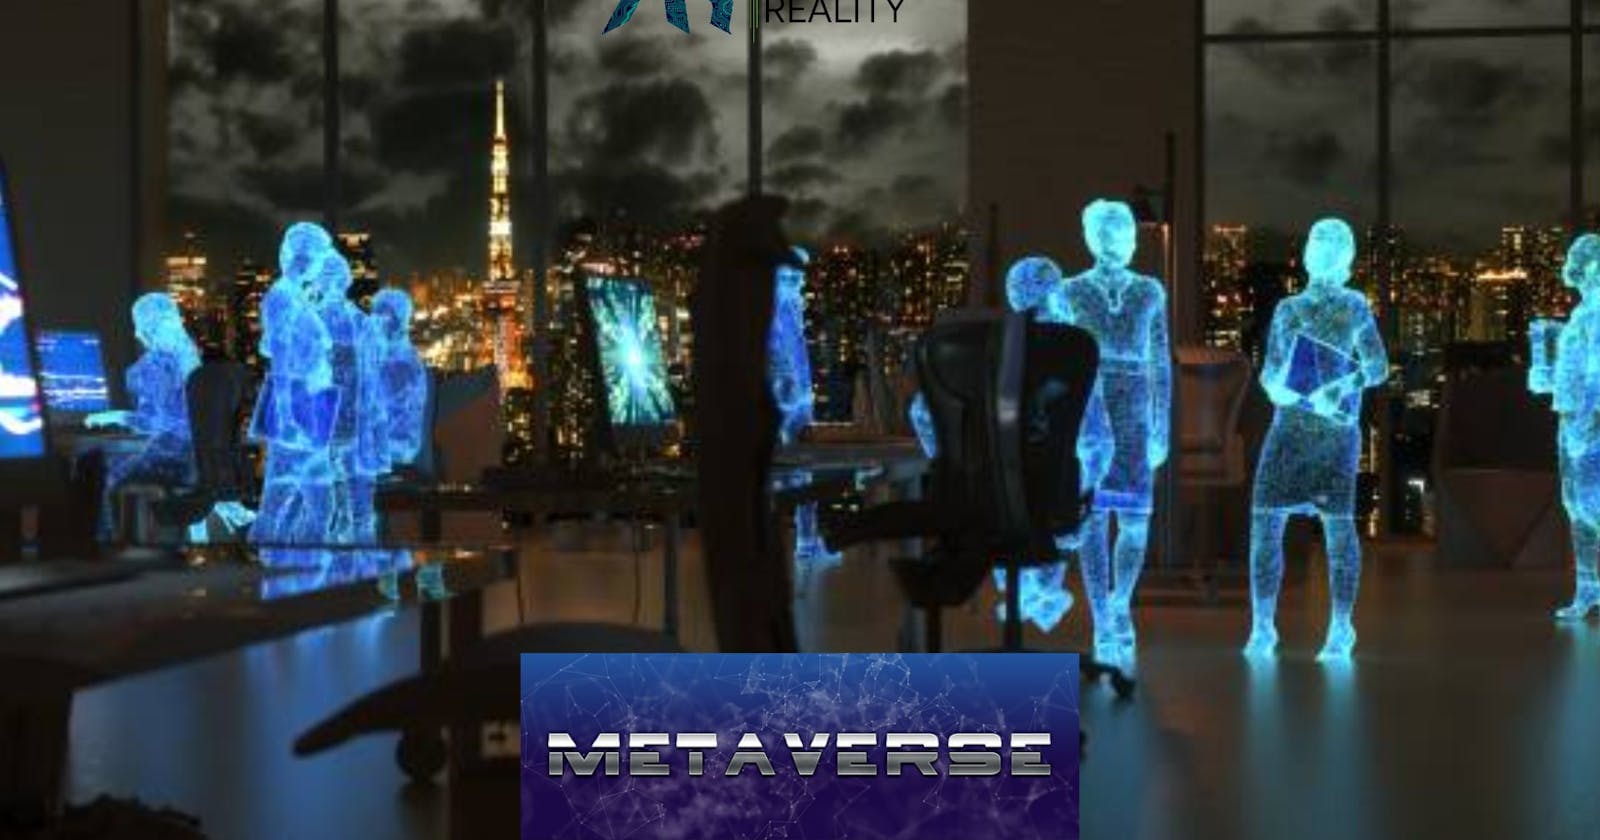 How does development impact game designers and artists within the Metaverse Ecosystem?